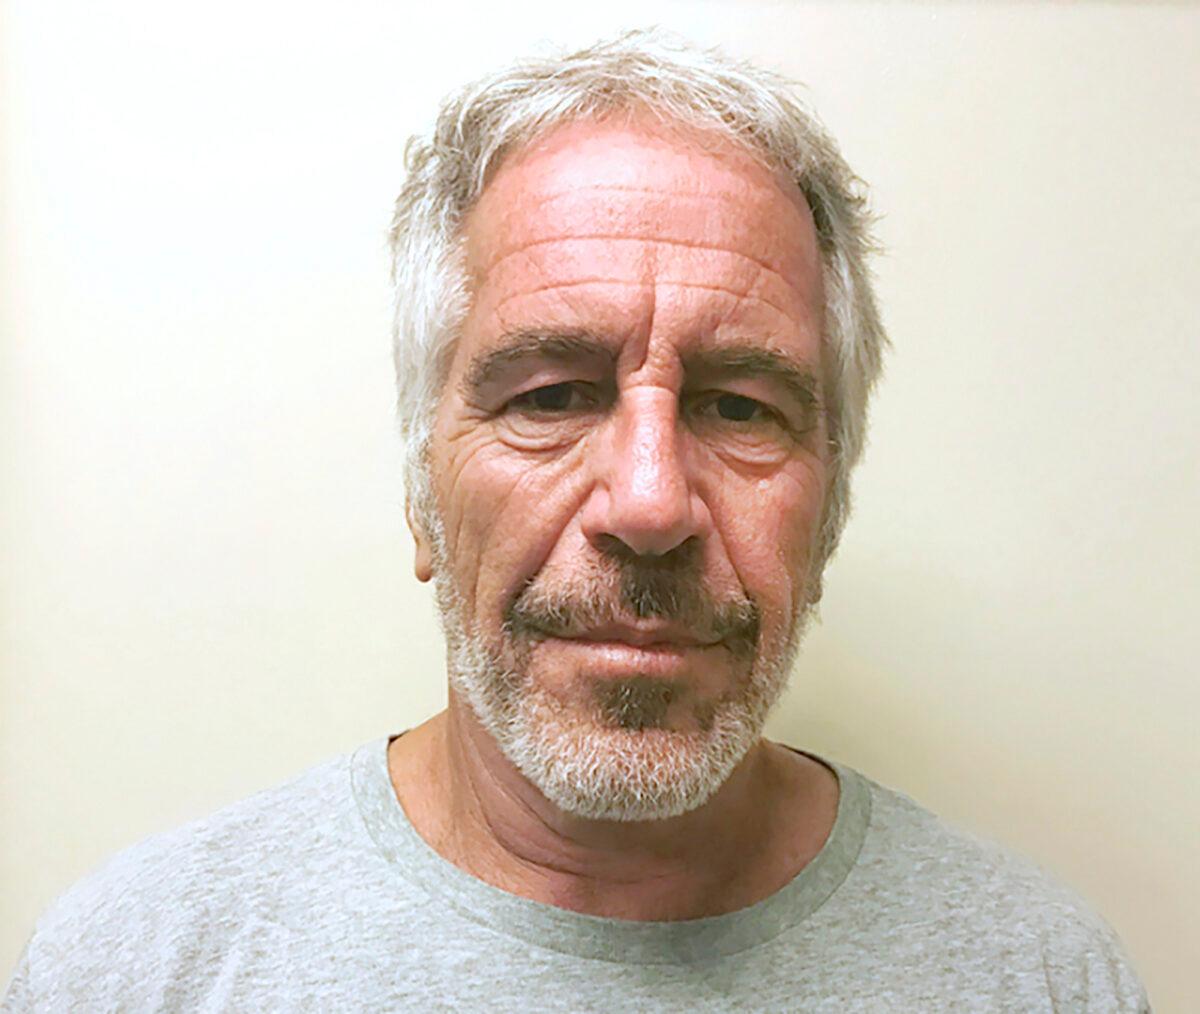 This March 28, 2017, file photo, provided by the New York State Sex Offender Registry shows Jeffrey Epstein. A judge denied bail for jailed financier Jeffrey Epstein on sex trafficking charges Thursday, July 18, 2019, saying the danger to the community that would result if the jet-setting defendant was free formed the "heart of this decision." (New York State Sex Offender Registry via AP)